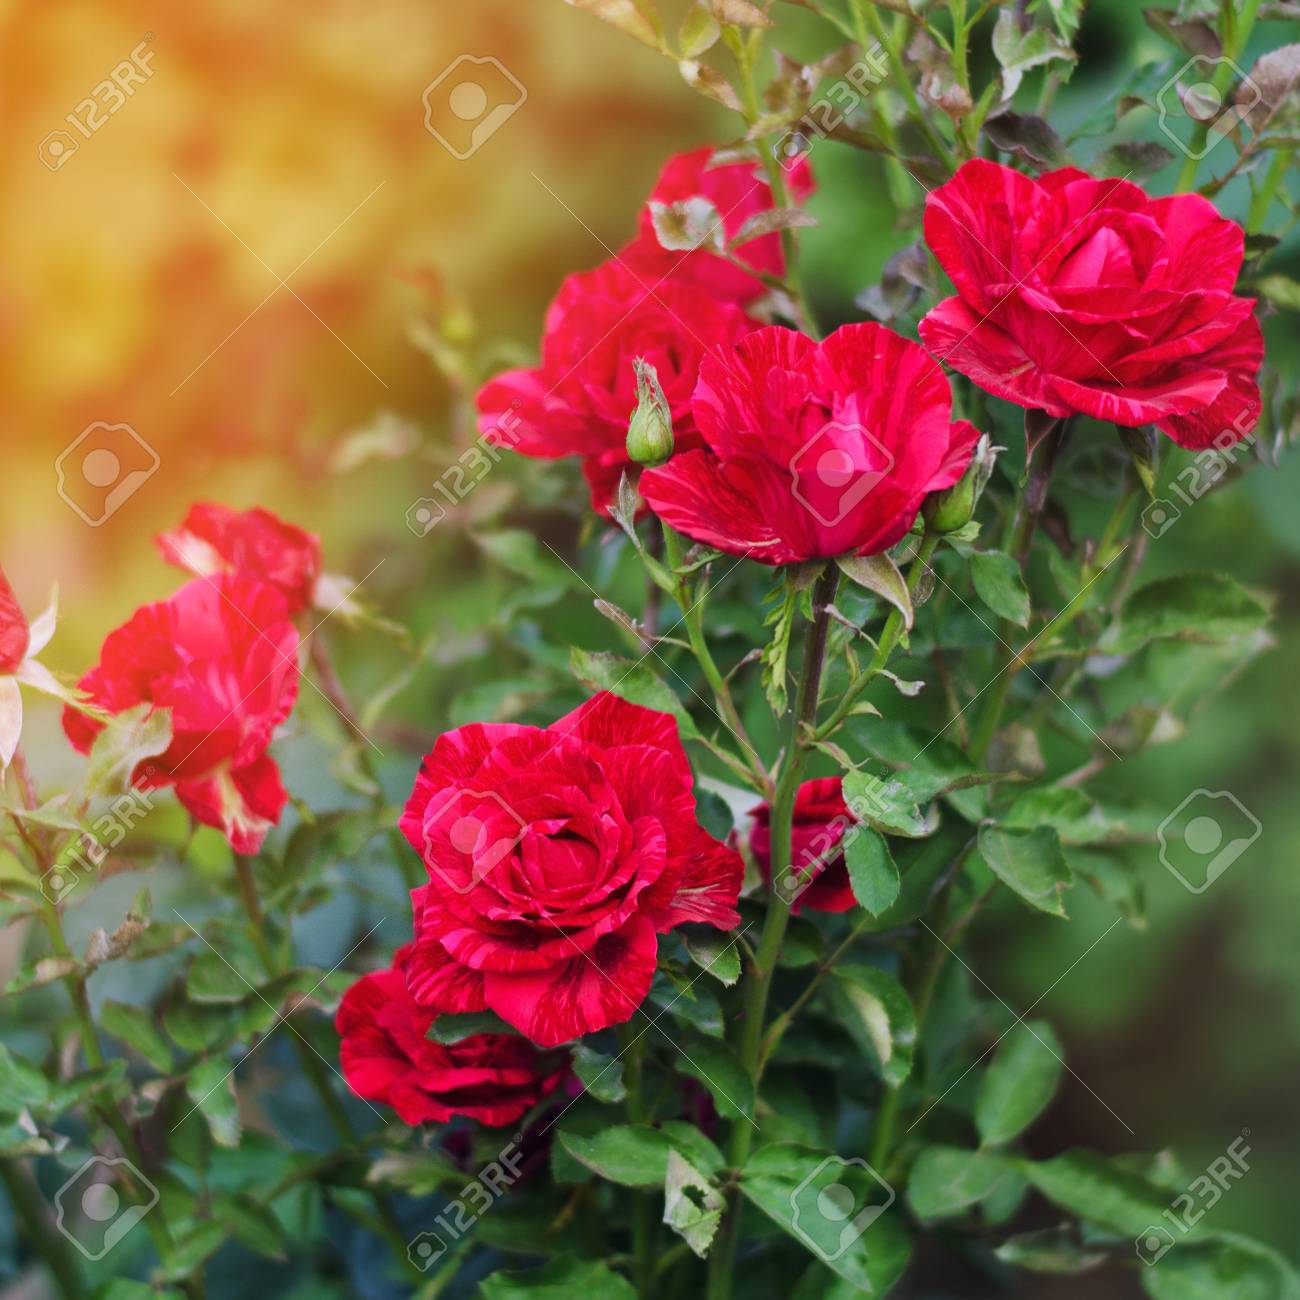 Beautiful Red Roses In The Garden Nature Wallpaper Flowers